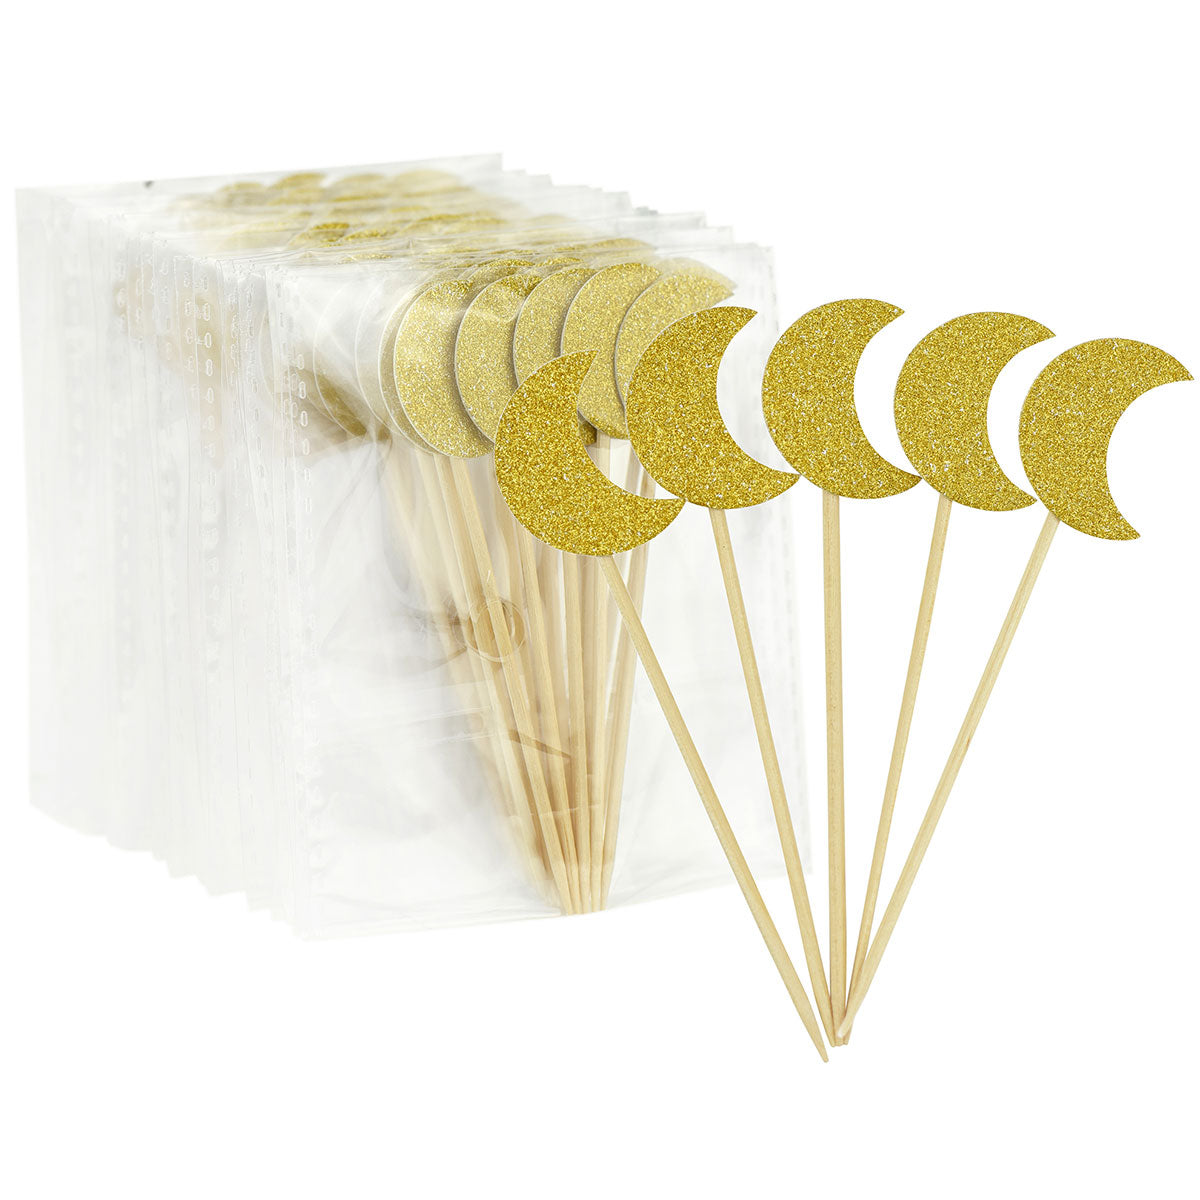 Gold Glitter Moon Cake Toppers 50 Pcs